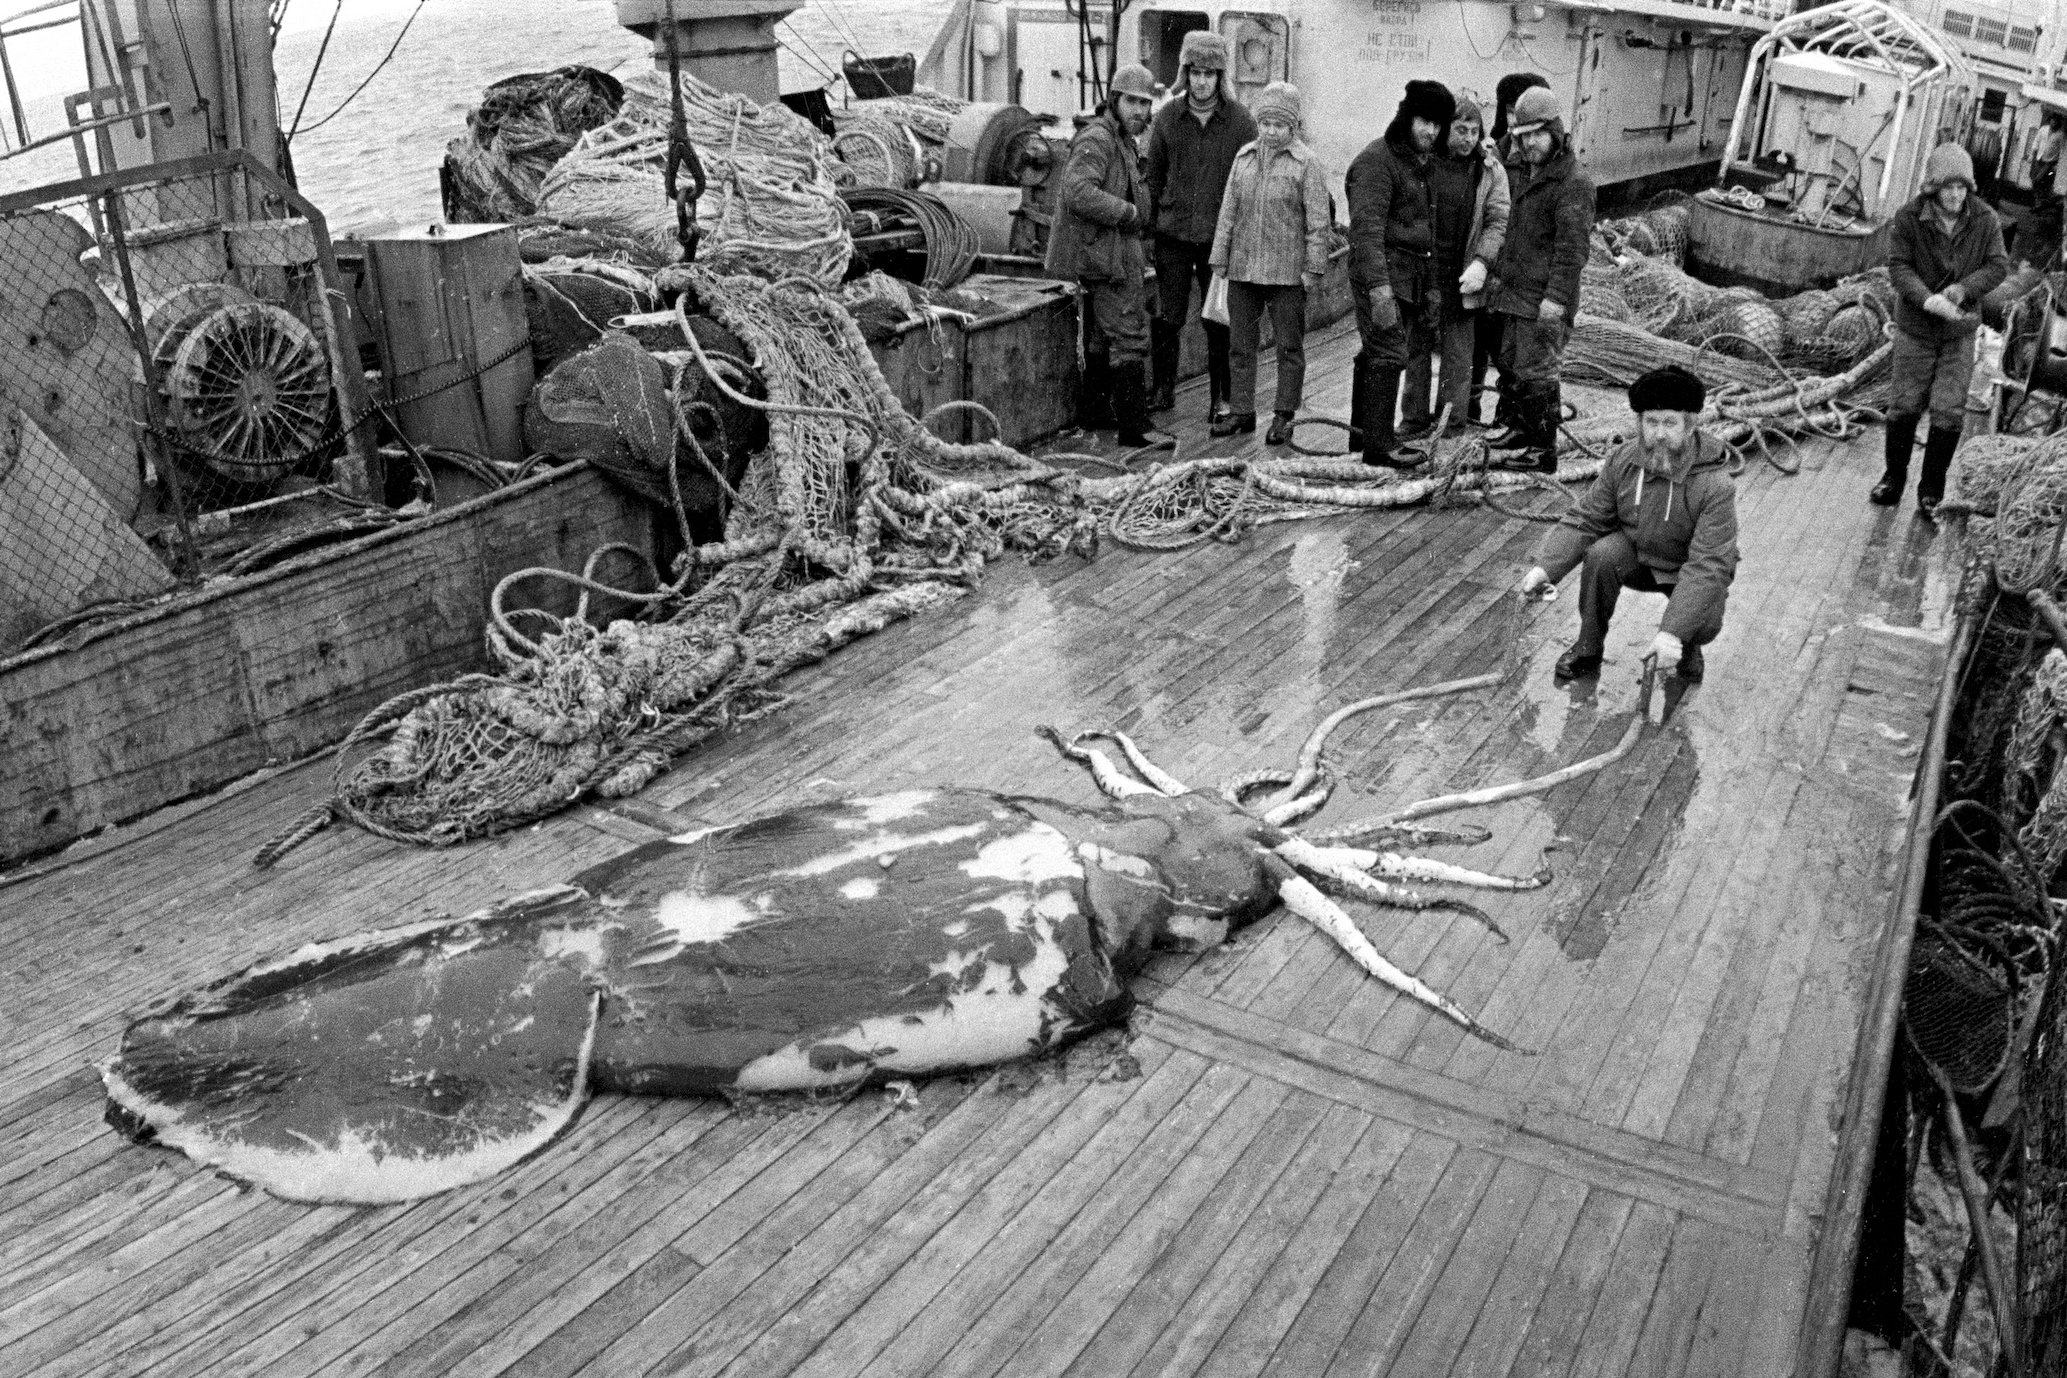 Man kneels next to giant squid laying on deck of a boat.